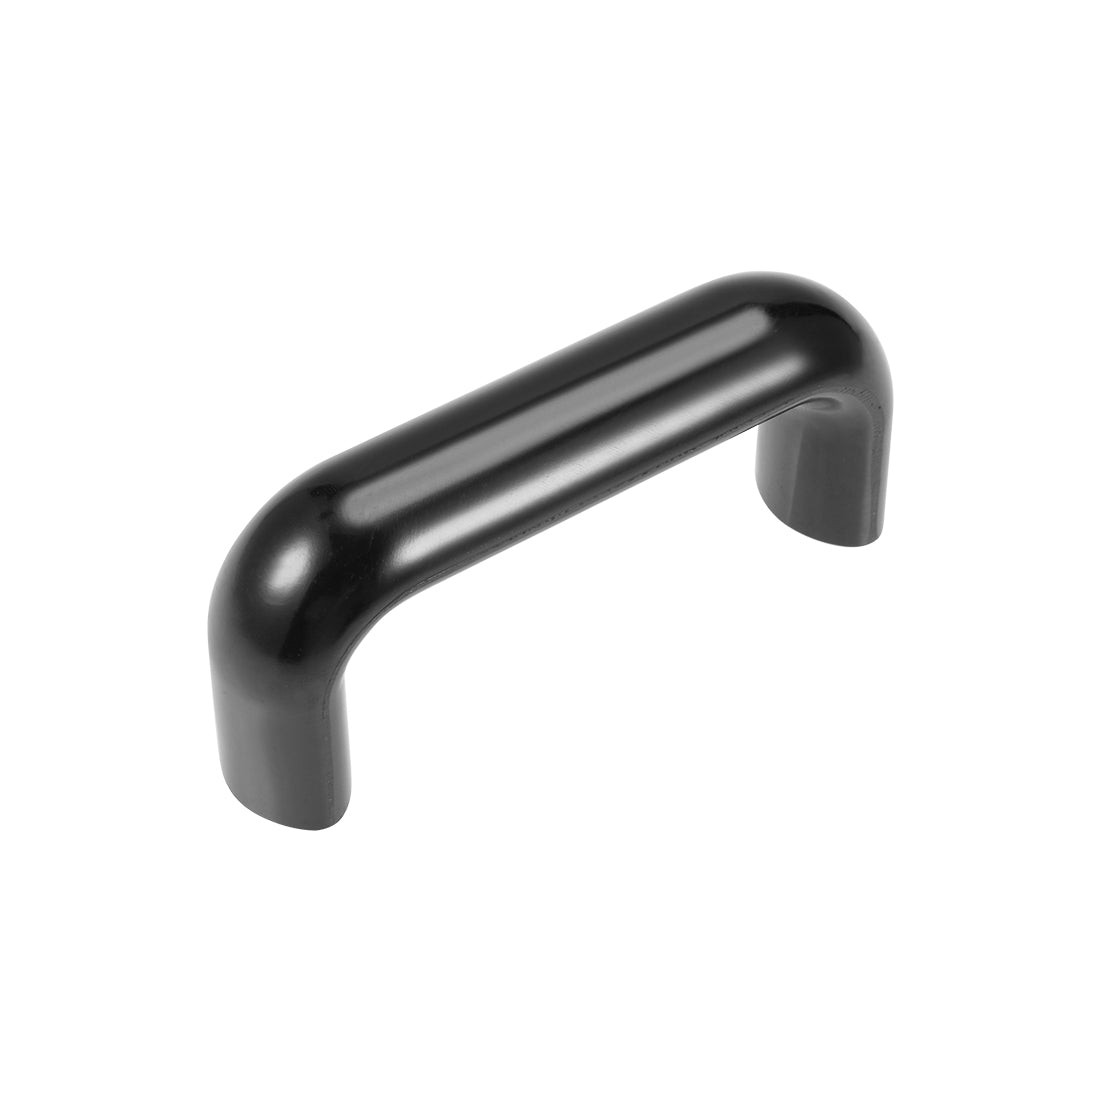 uxcell Uxcell Bakelite Plastic Pulls Handle 90mm Hole Centers Black for Industrial Machine, M8 Thread